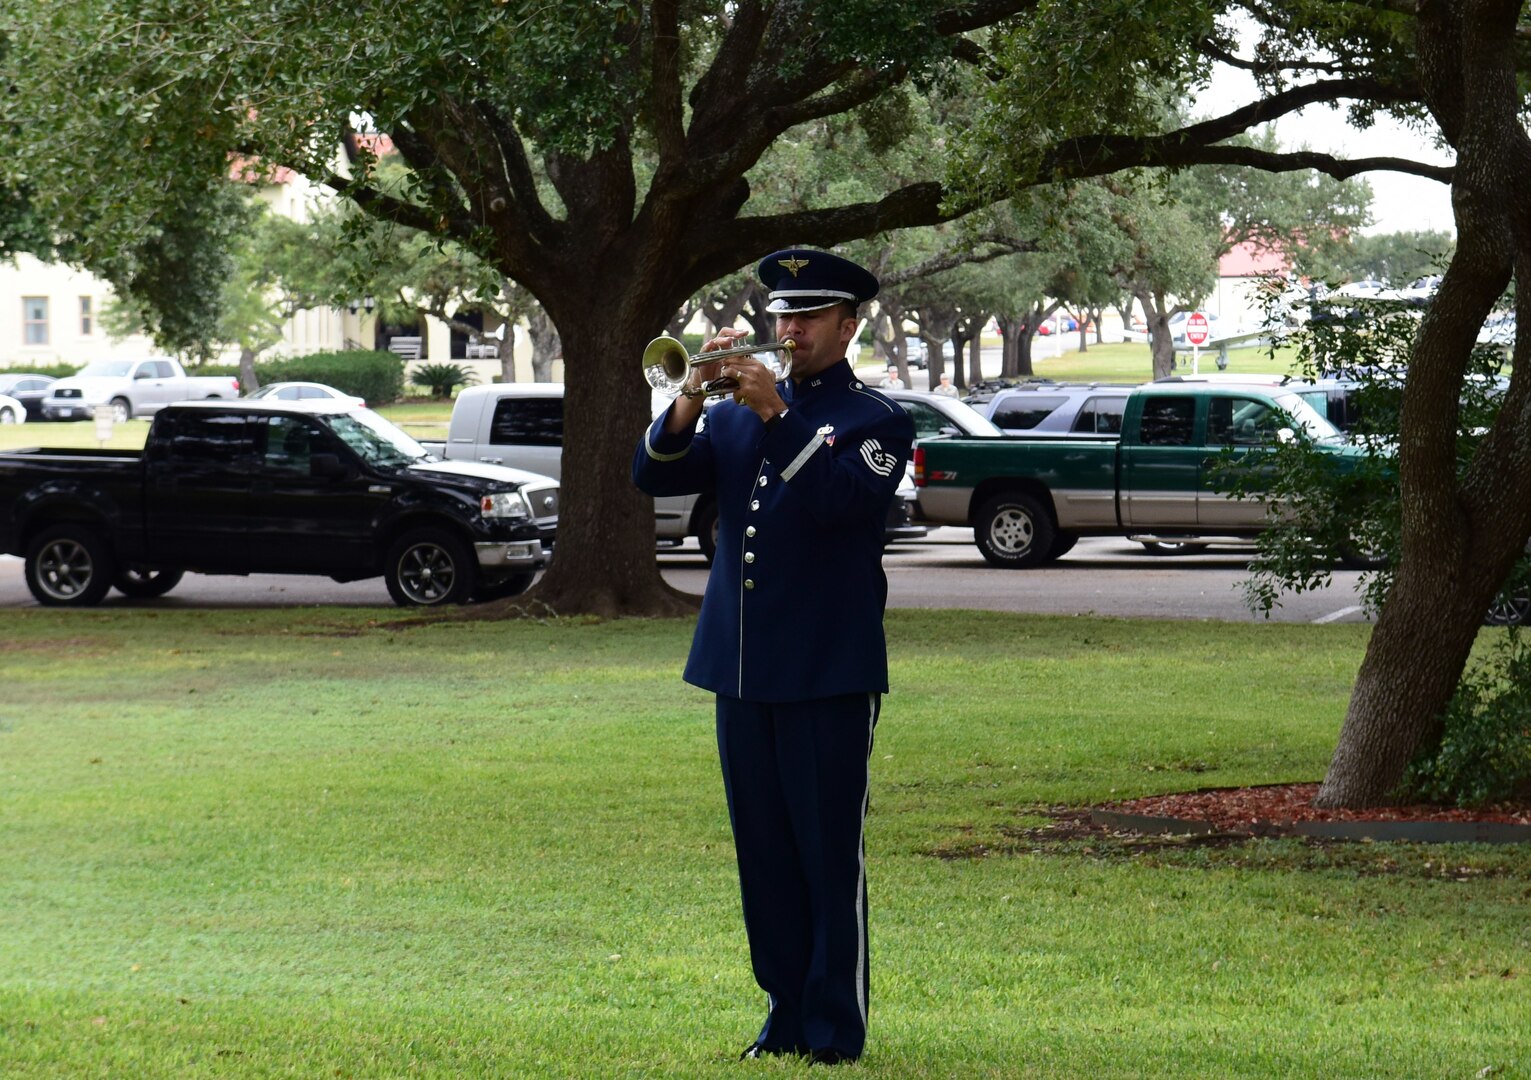 Tech. Sgt. David Evans, a musician with the U.S. Air Force Band of the West plays Taps on his trumpet during a funeral for Senior Master Sgt. Karen Marshall and her husband Robert Scott Marshall Nov. 9, 2017 at Joint Base San Antonio-Randolph.  Scott and Karen were killed in a shooting at First Baptist Church in Sutherland Springs, Texas Nov. 5, 2017.  Scott was a civilian employee with the 12th Flying Training Wing and an Air Force Veteran.  Karen was an Active Guard and Reserve Airman transitioning from an assignment at Joint Base Andrews, Maryland.